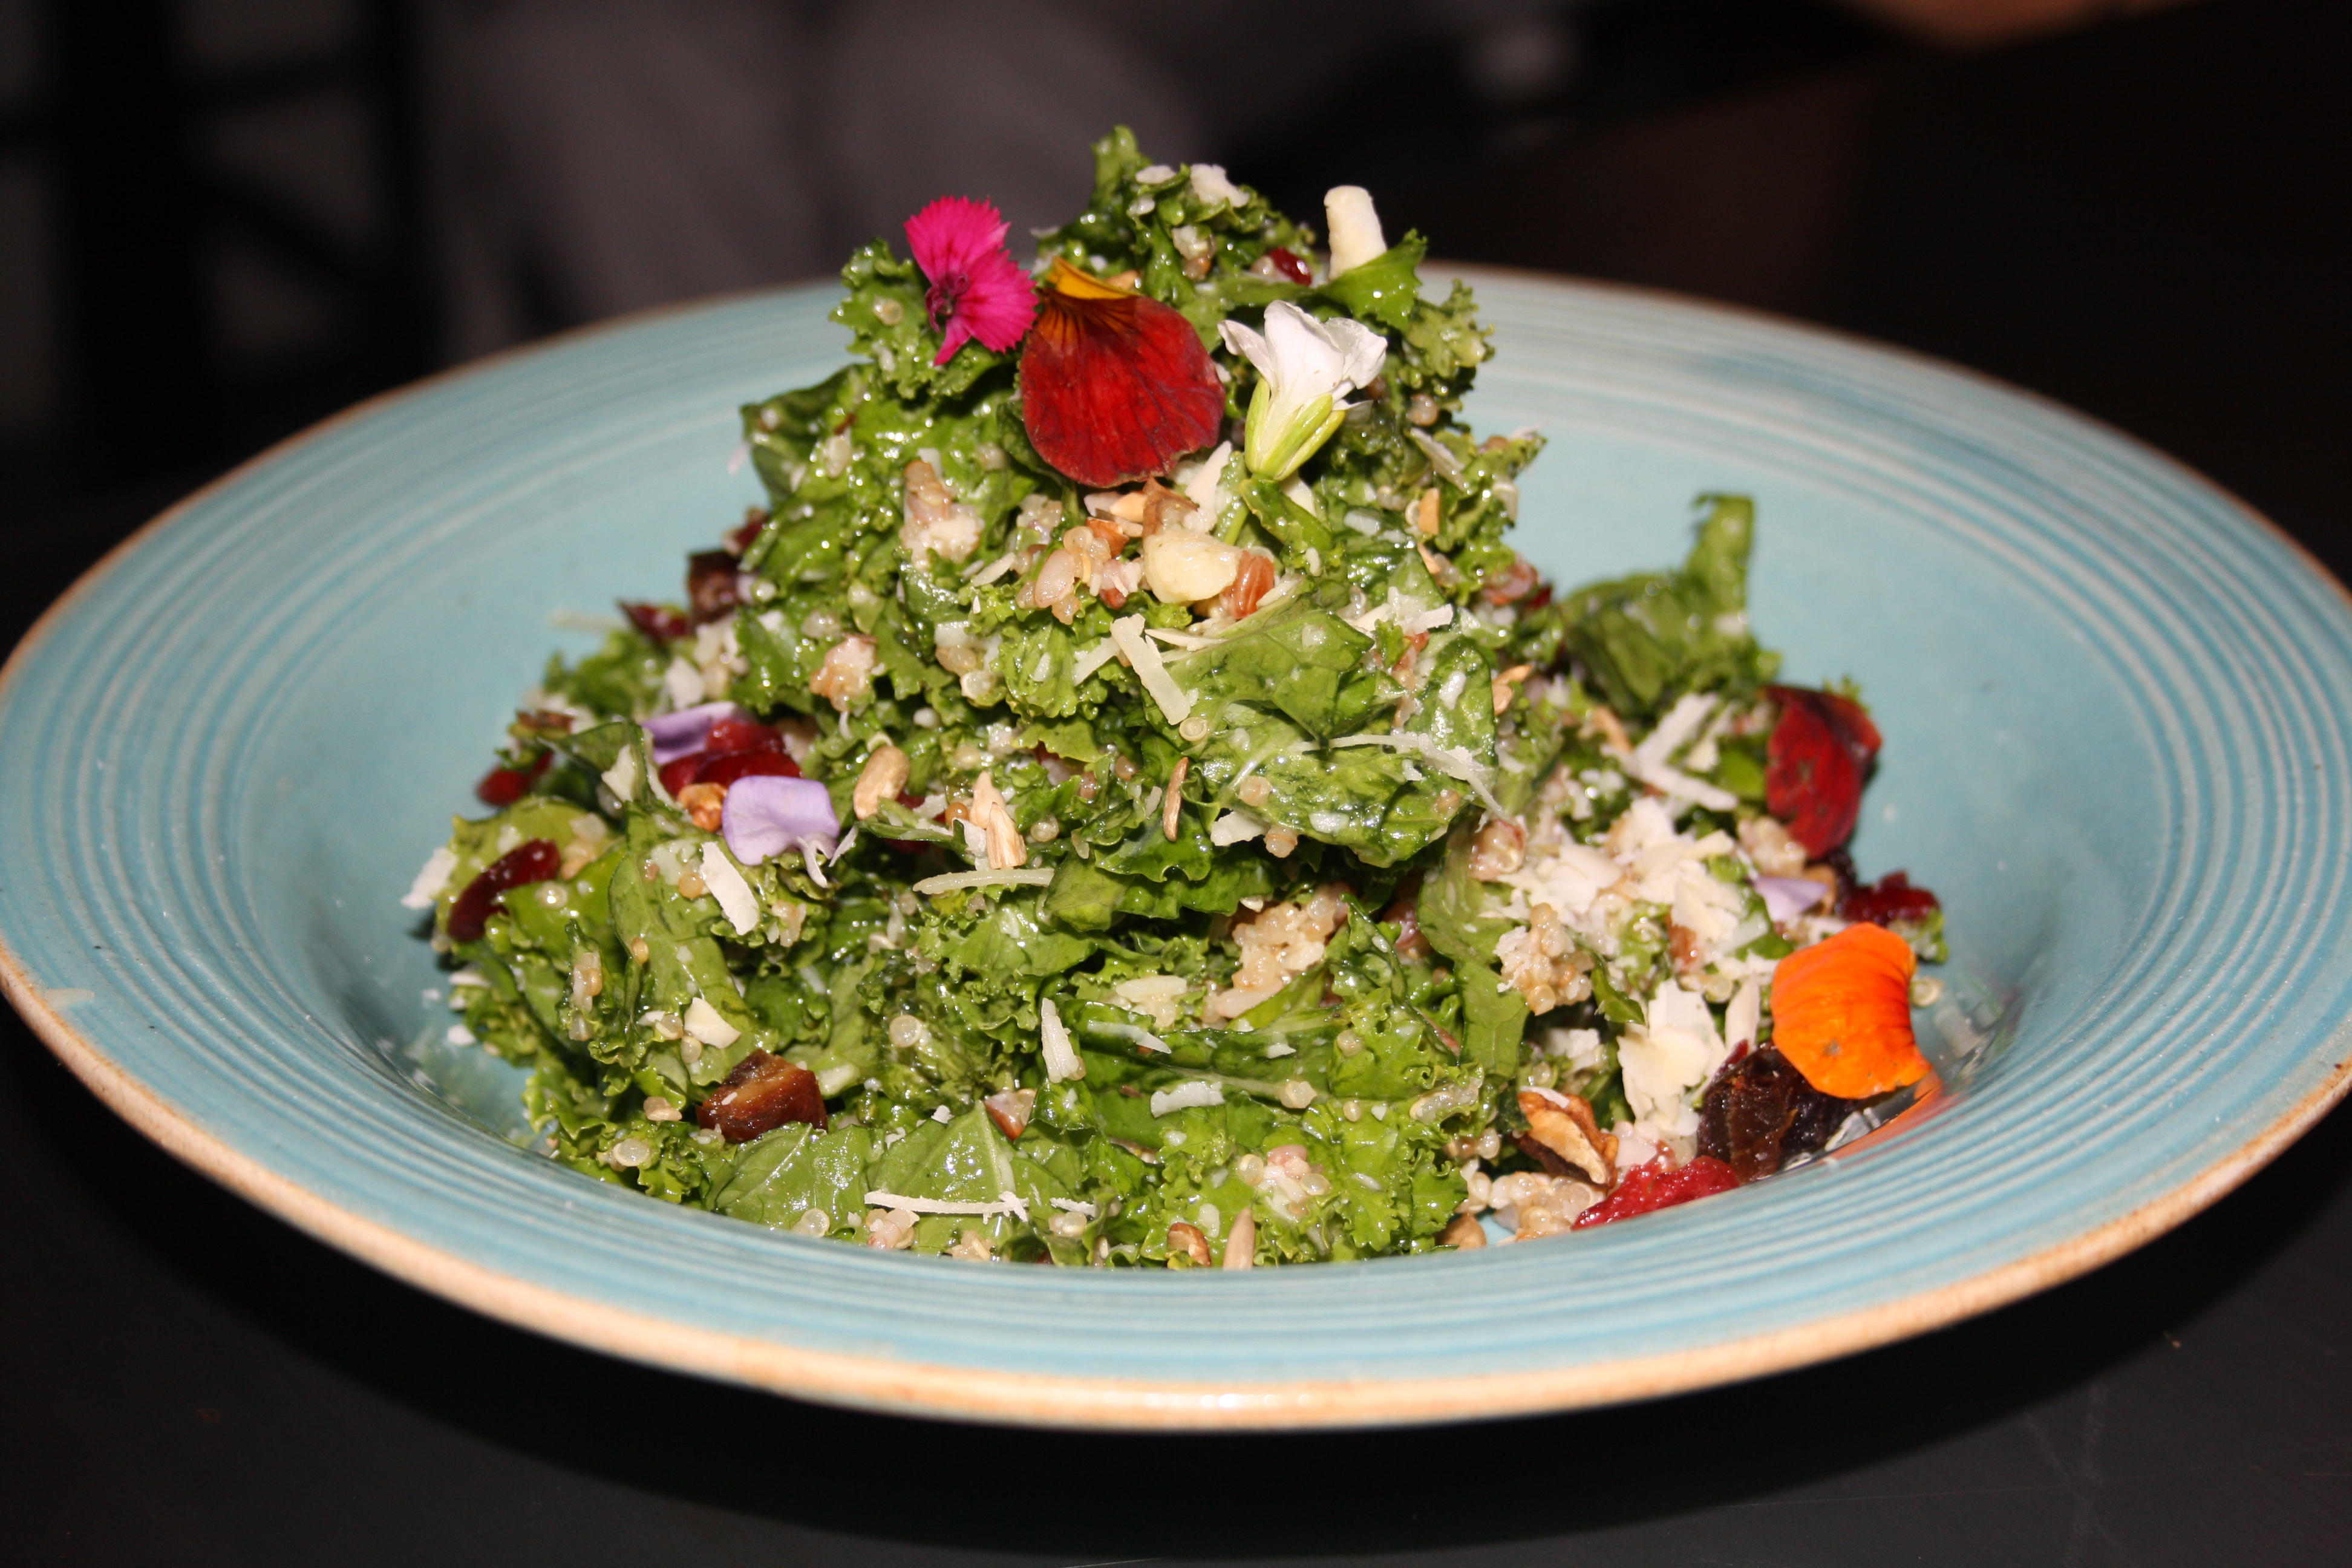 Kale and Quinoa Salad with Dates, Toasted Walnuts, Lime Parmesan Dressing